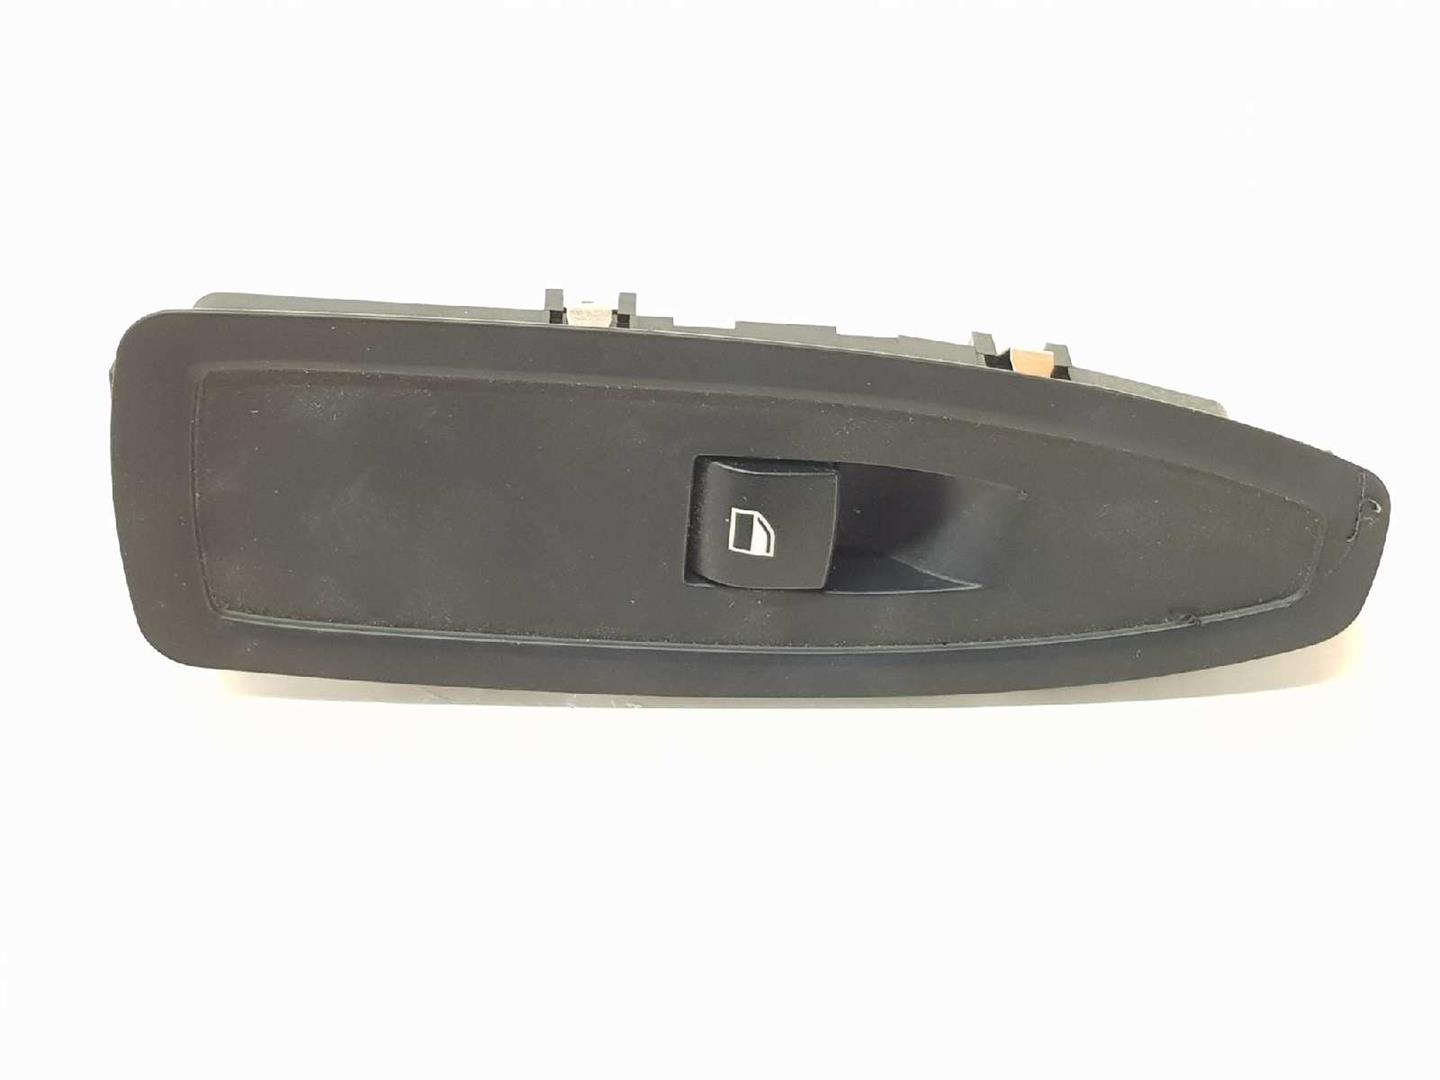 BMW 1 Series F20/F21 (2011-2020) Front Right Door Window Switch 9208107, 61319208107 19656864